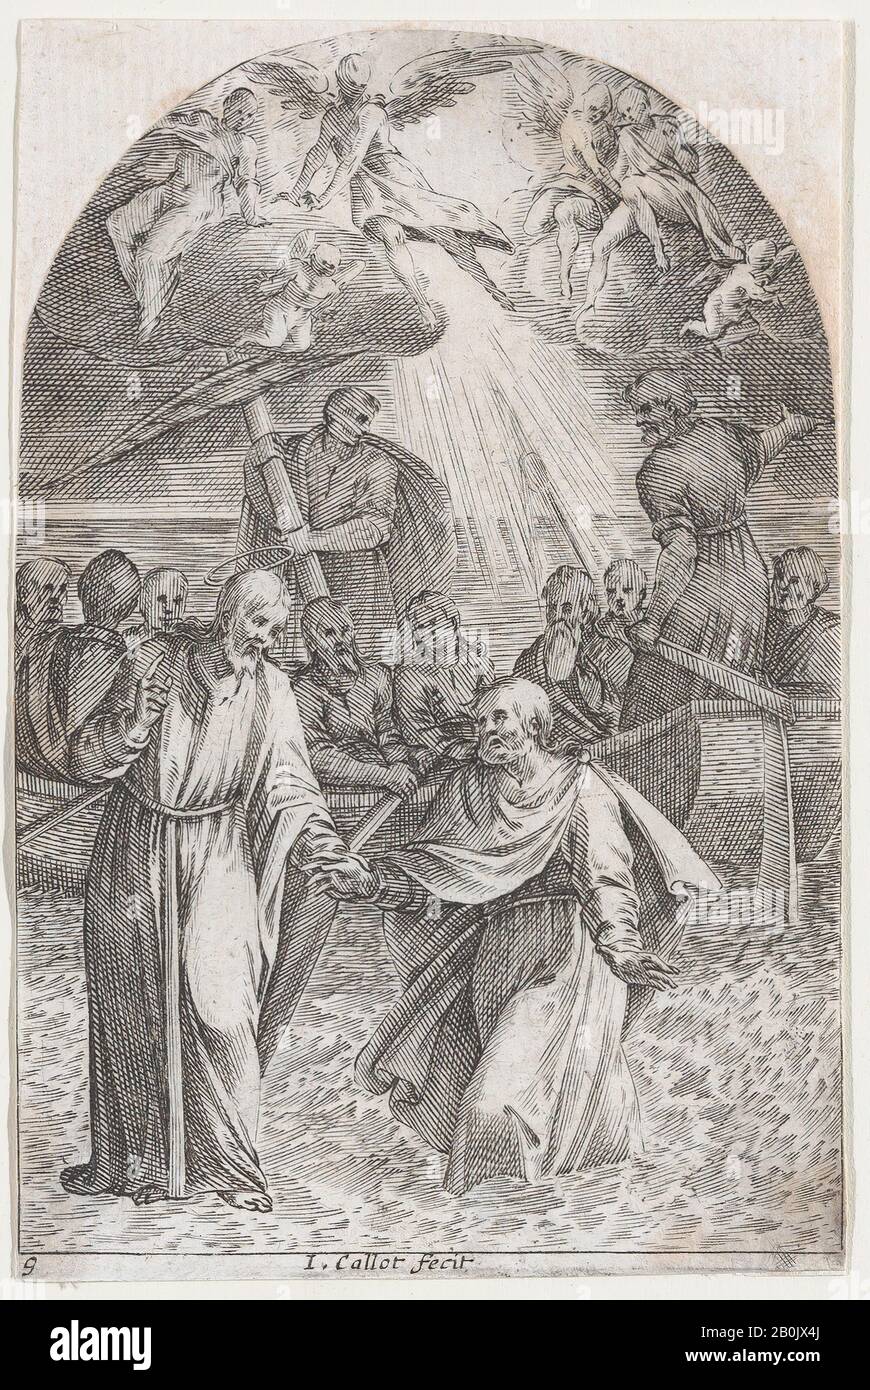 Jacques Callot, Christ Walking on Water, Holding the Hand of St. Peter (Second Composition), from Les Tableaux de Rome, Les Eglises Jubilaires (The Paintings of Rome, The Churches Jubilee), plate 9, Les Tableaux de Rome, Les Eglises Jubilaires, Jacques Callot (French, Nancy 1592–1635 Nancy), 1607–11, Engraving; second state of three (Lieure), Sheet: 4 3/8 x 2 15/16 in. (11.1 x 7.4 cm), Prints Stock Photo